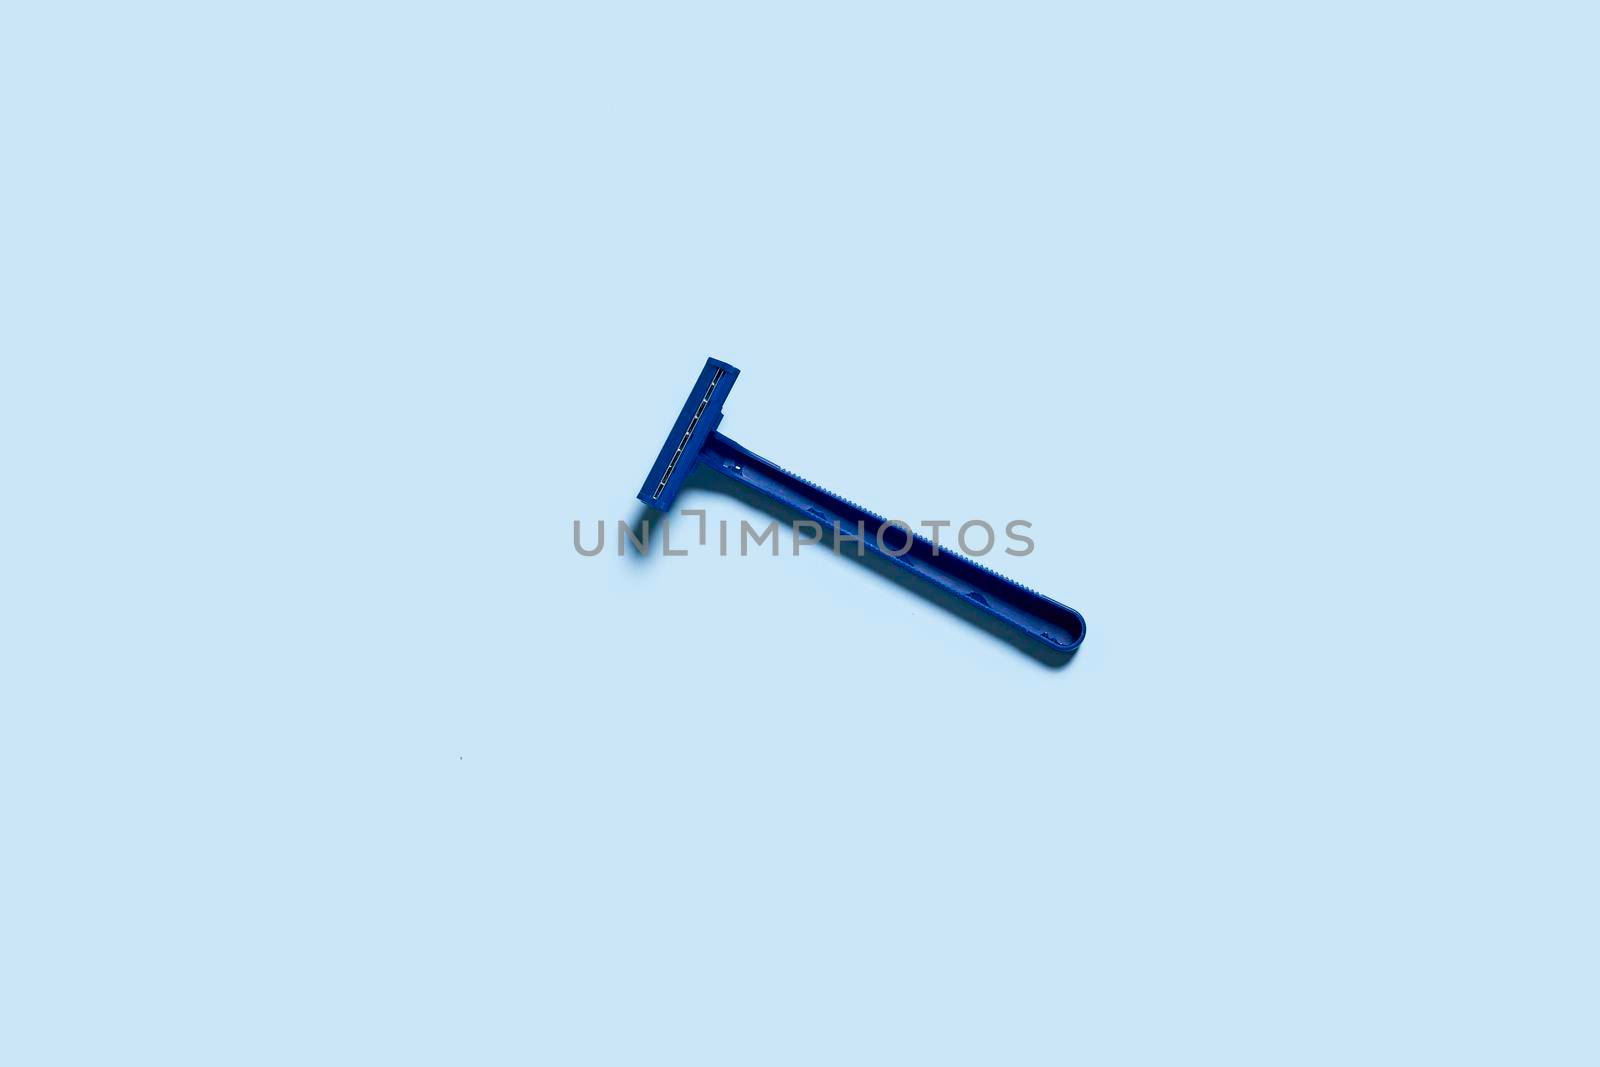 A single use shaving razor on blue background. View from above